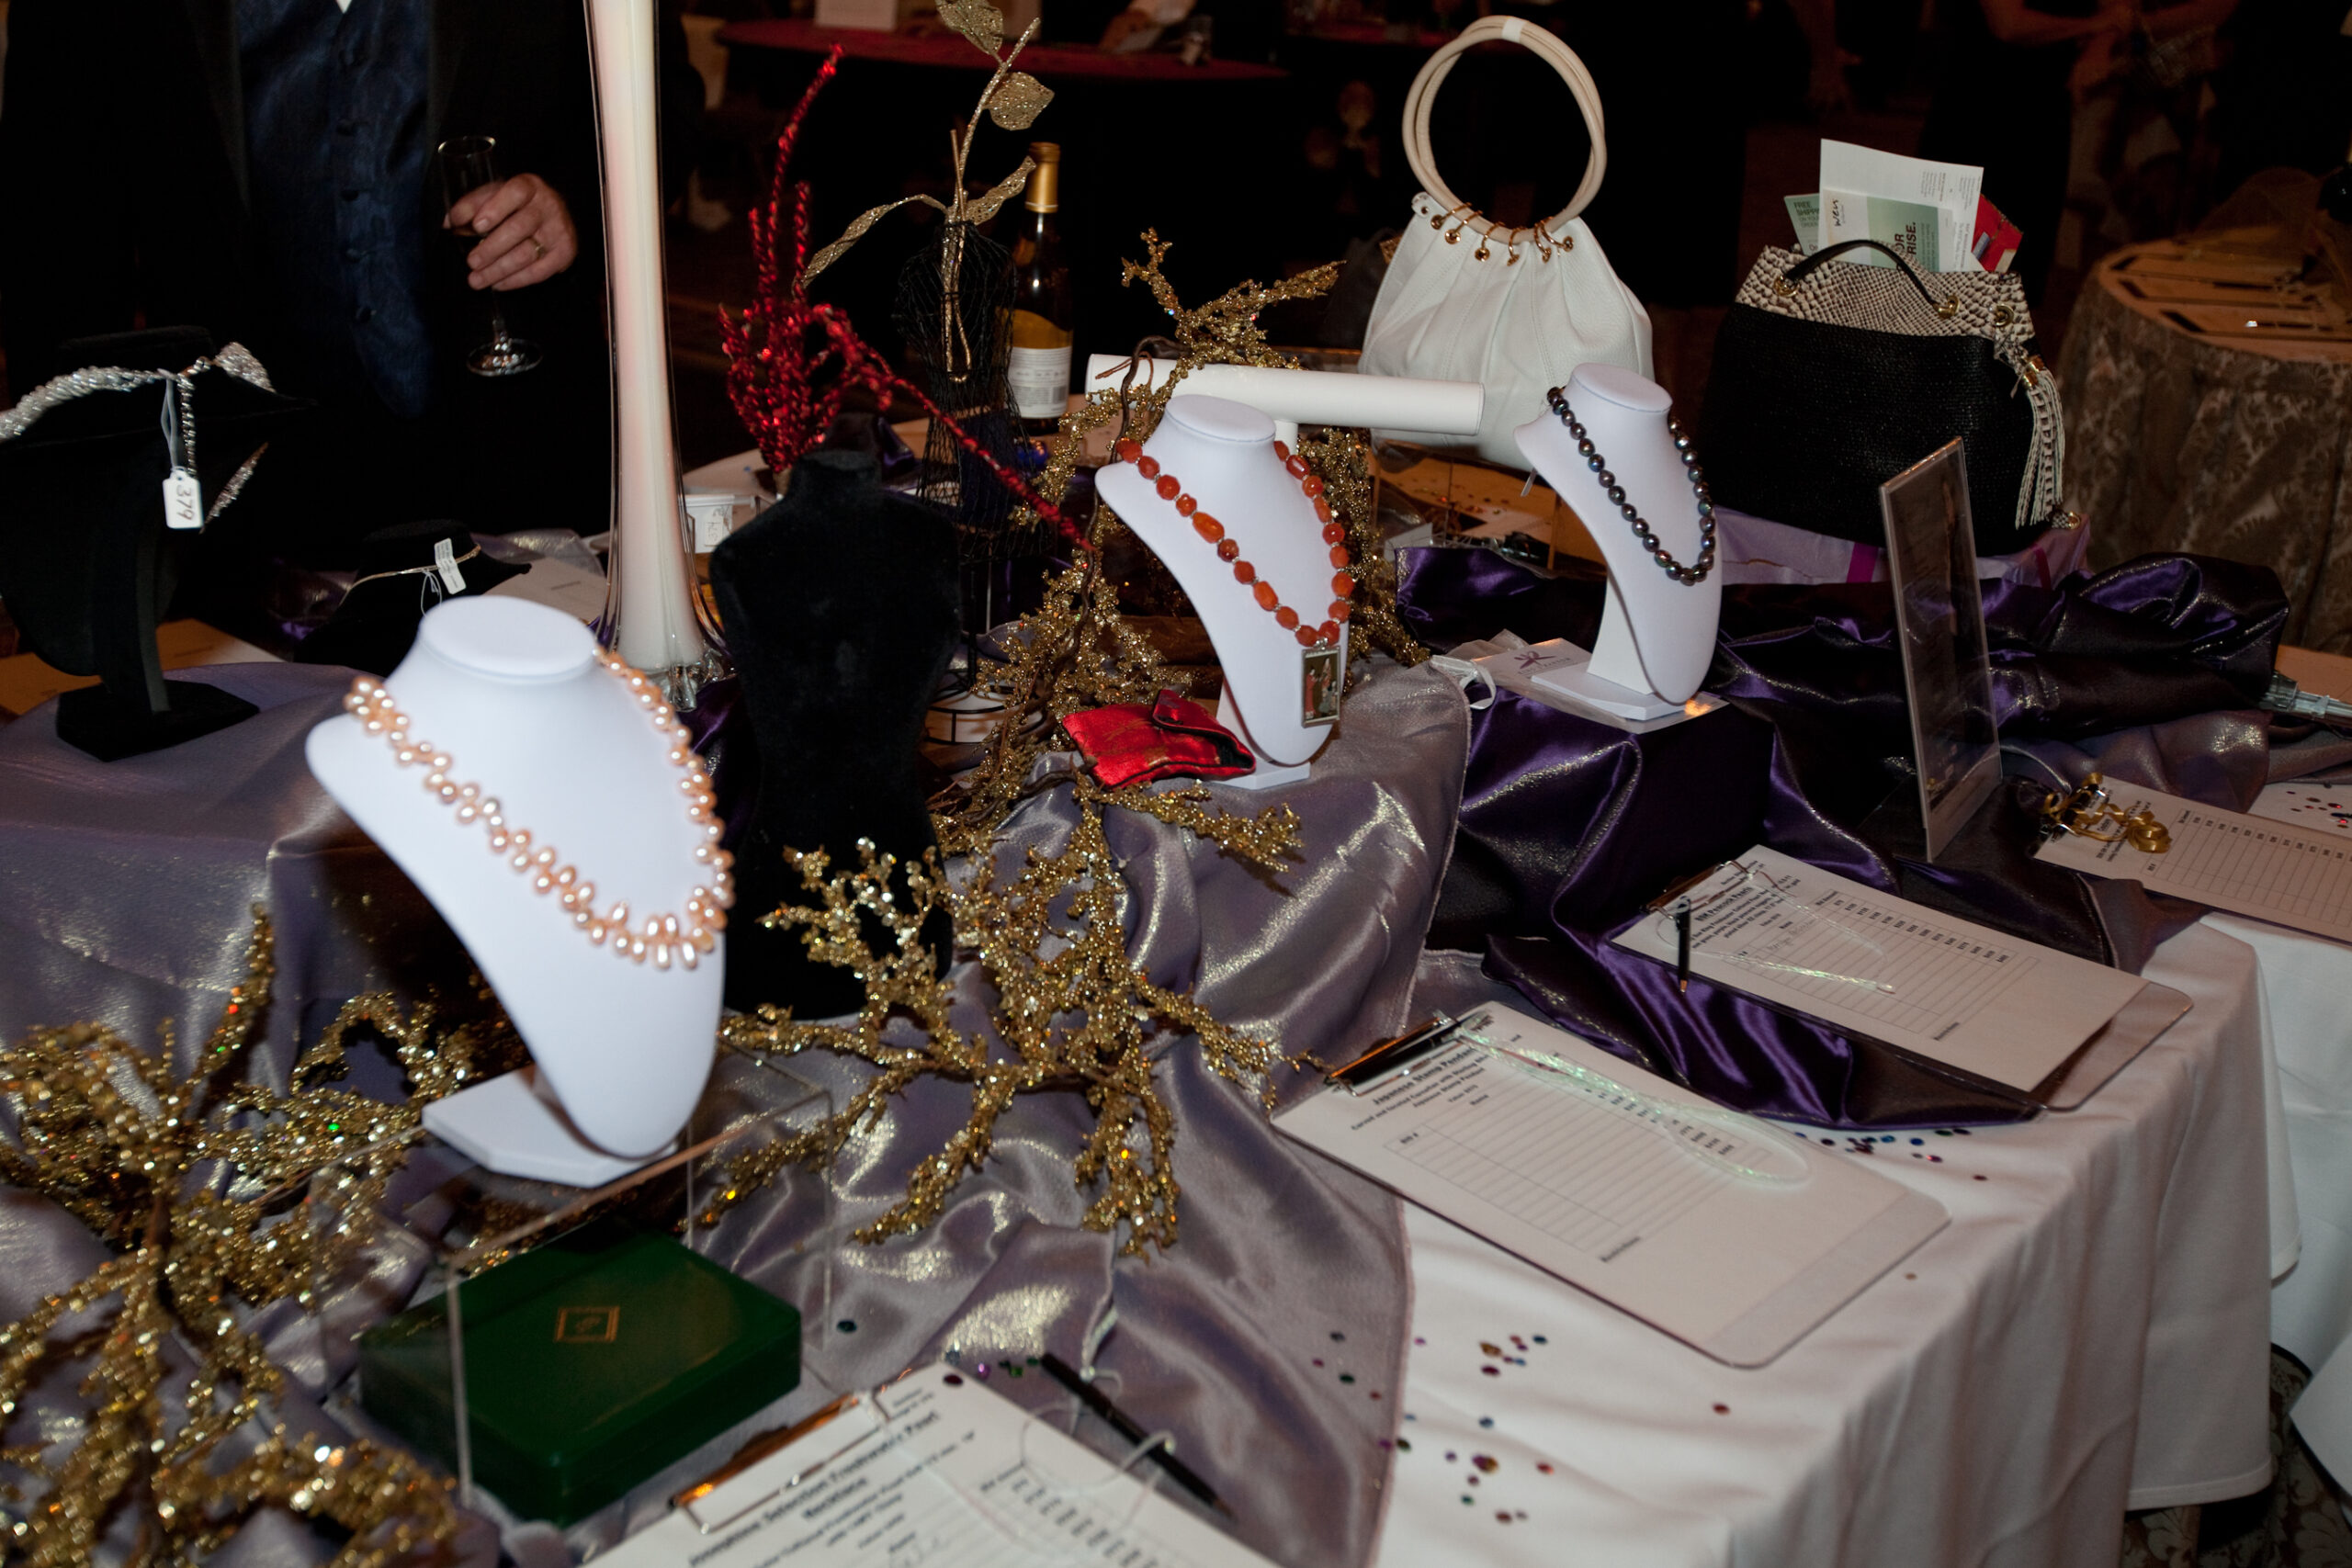 Jewelry displayed on a table